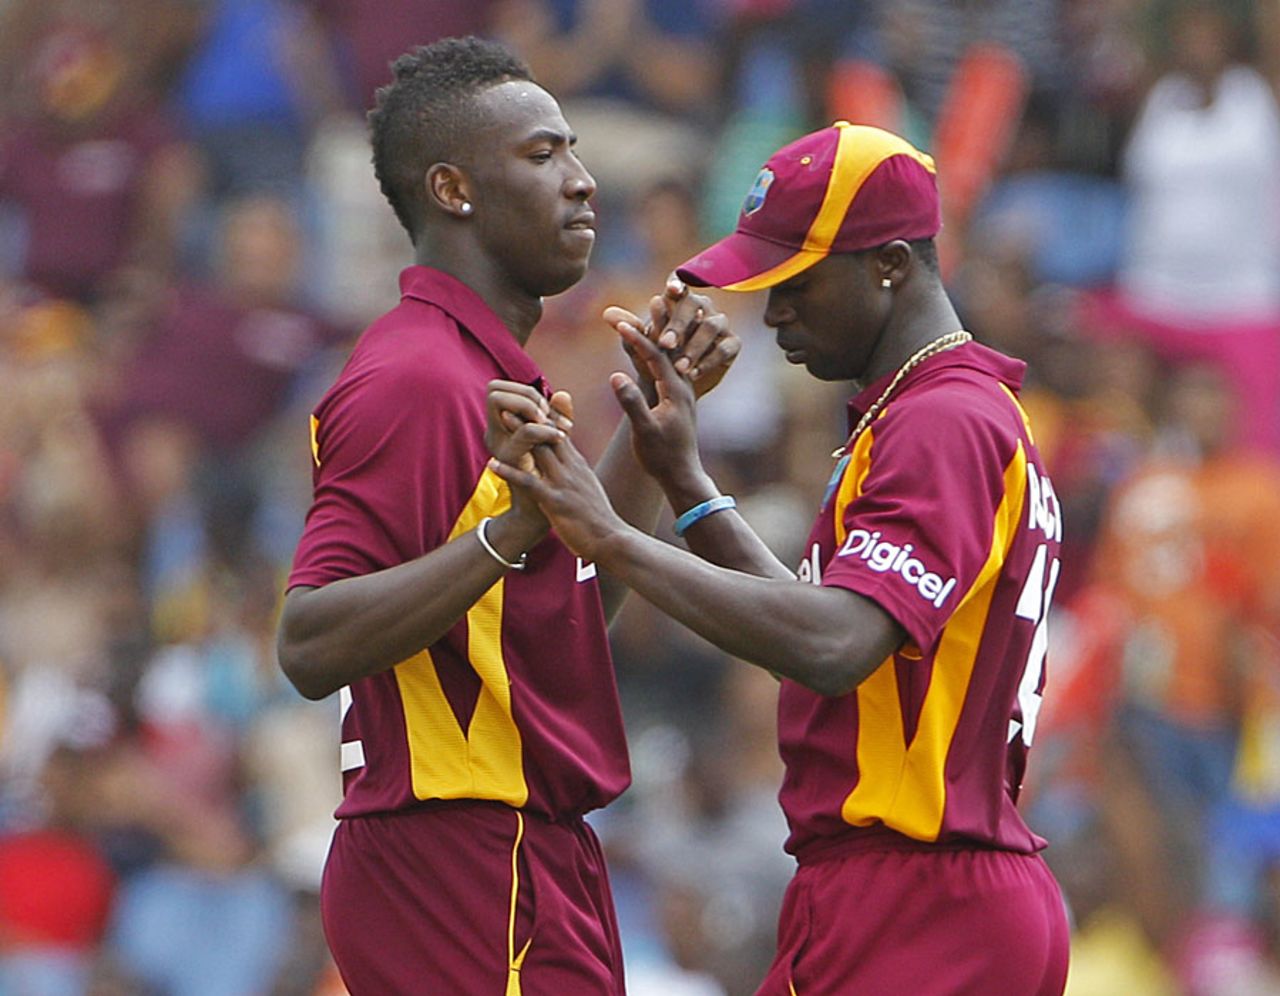 Andre Russell and Kemar Roach celebrate a wicket, West Indies v Australia, Gros Islet, St Lucia, March 25, 2012